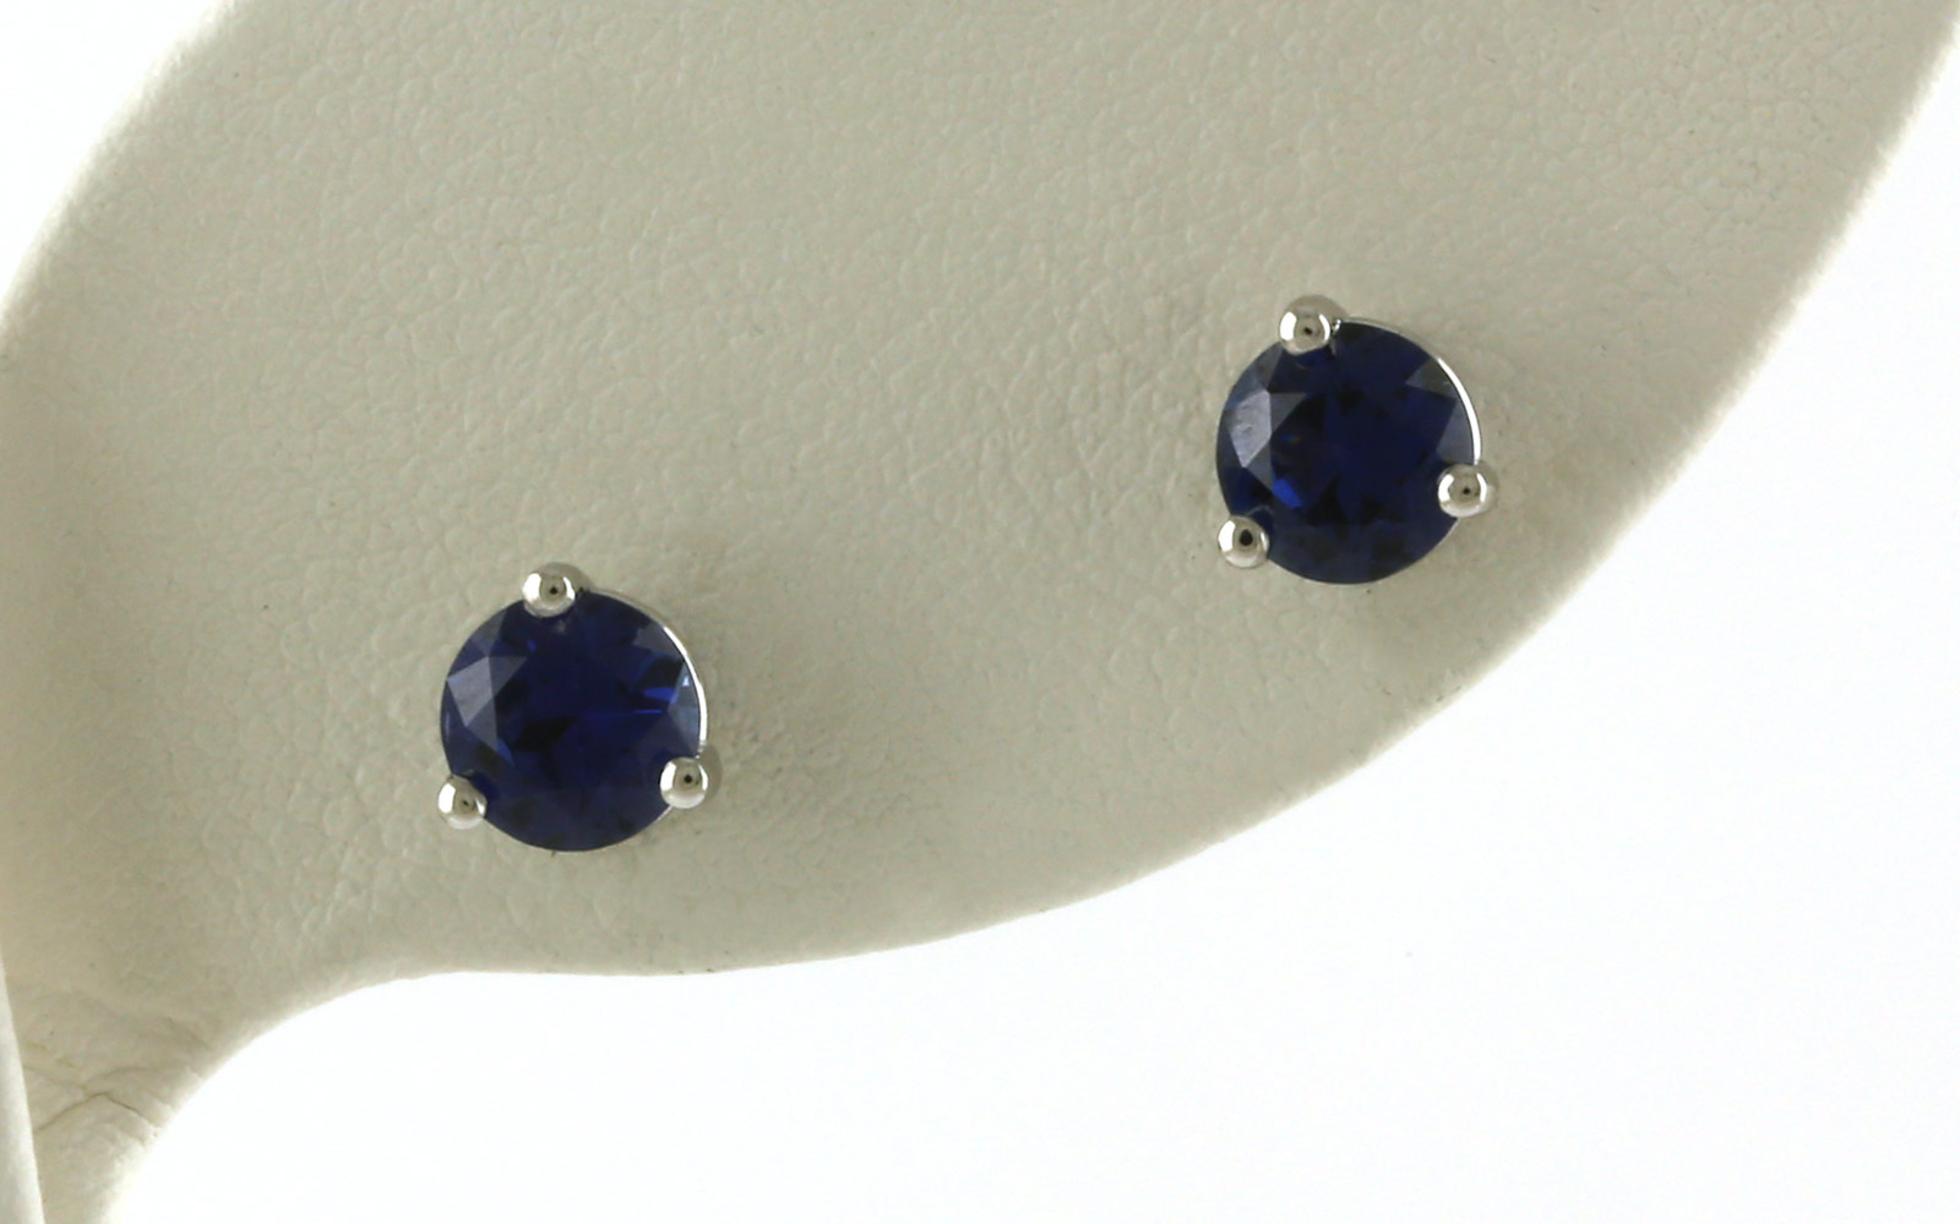 Montana Yogo Sapphire Stud Earrings in 3-Prong Martini Settings in White Gold (1.51cts TWT)